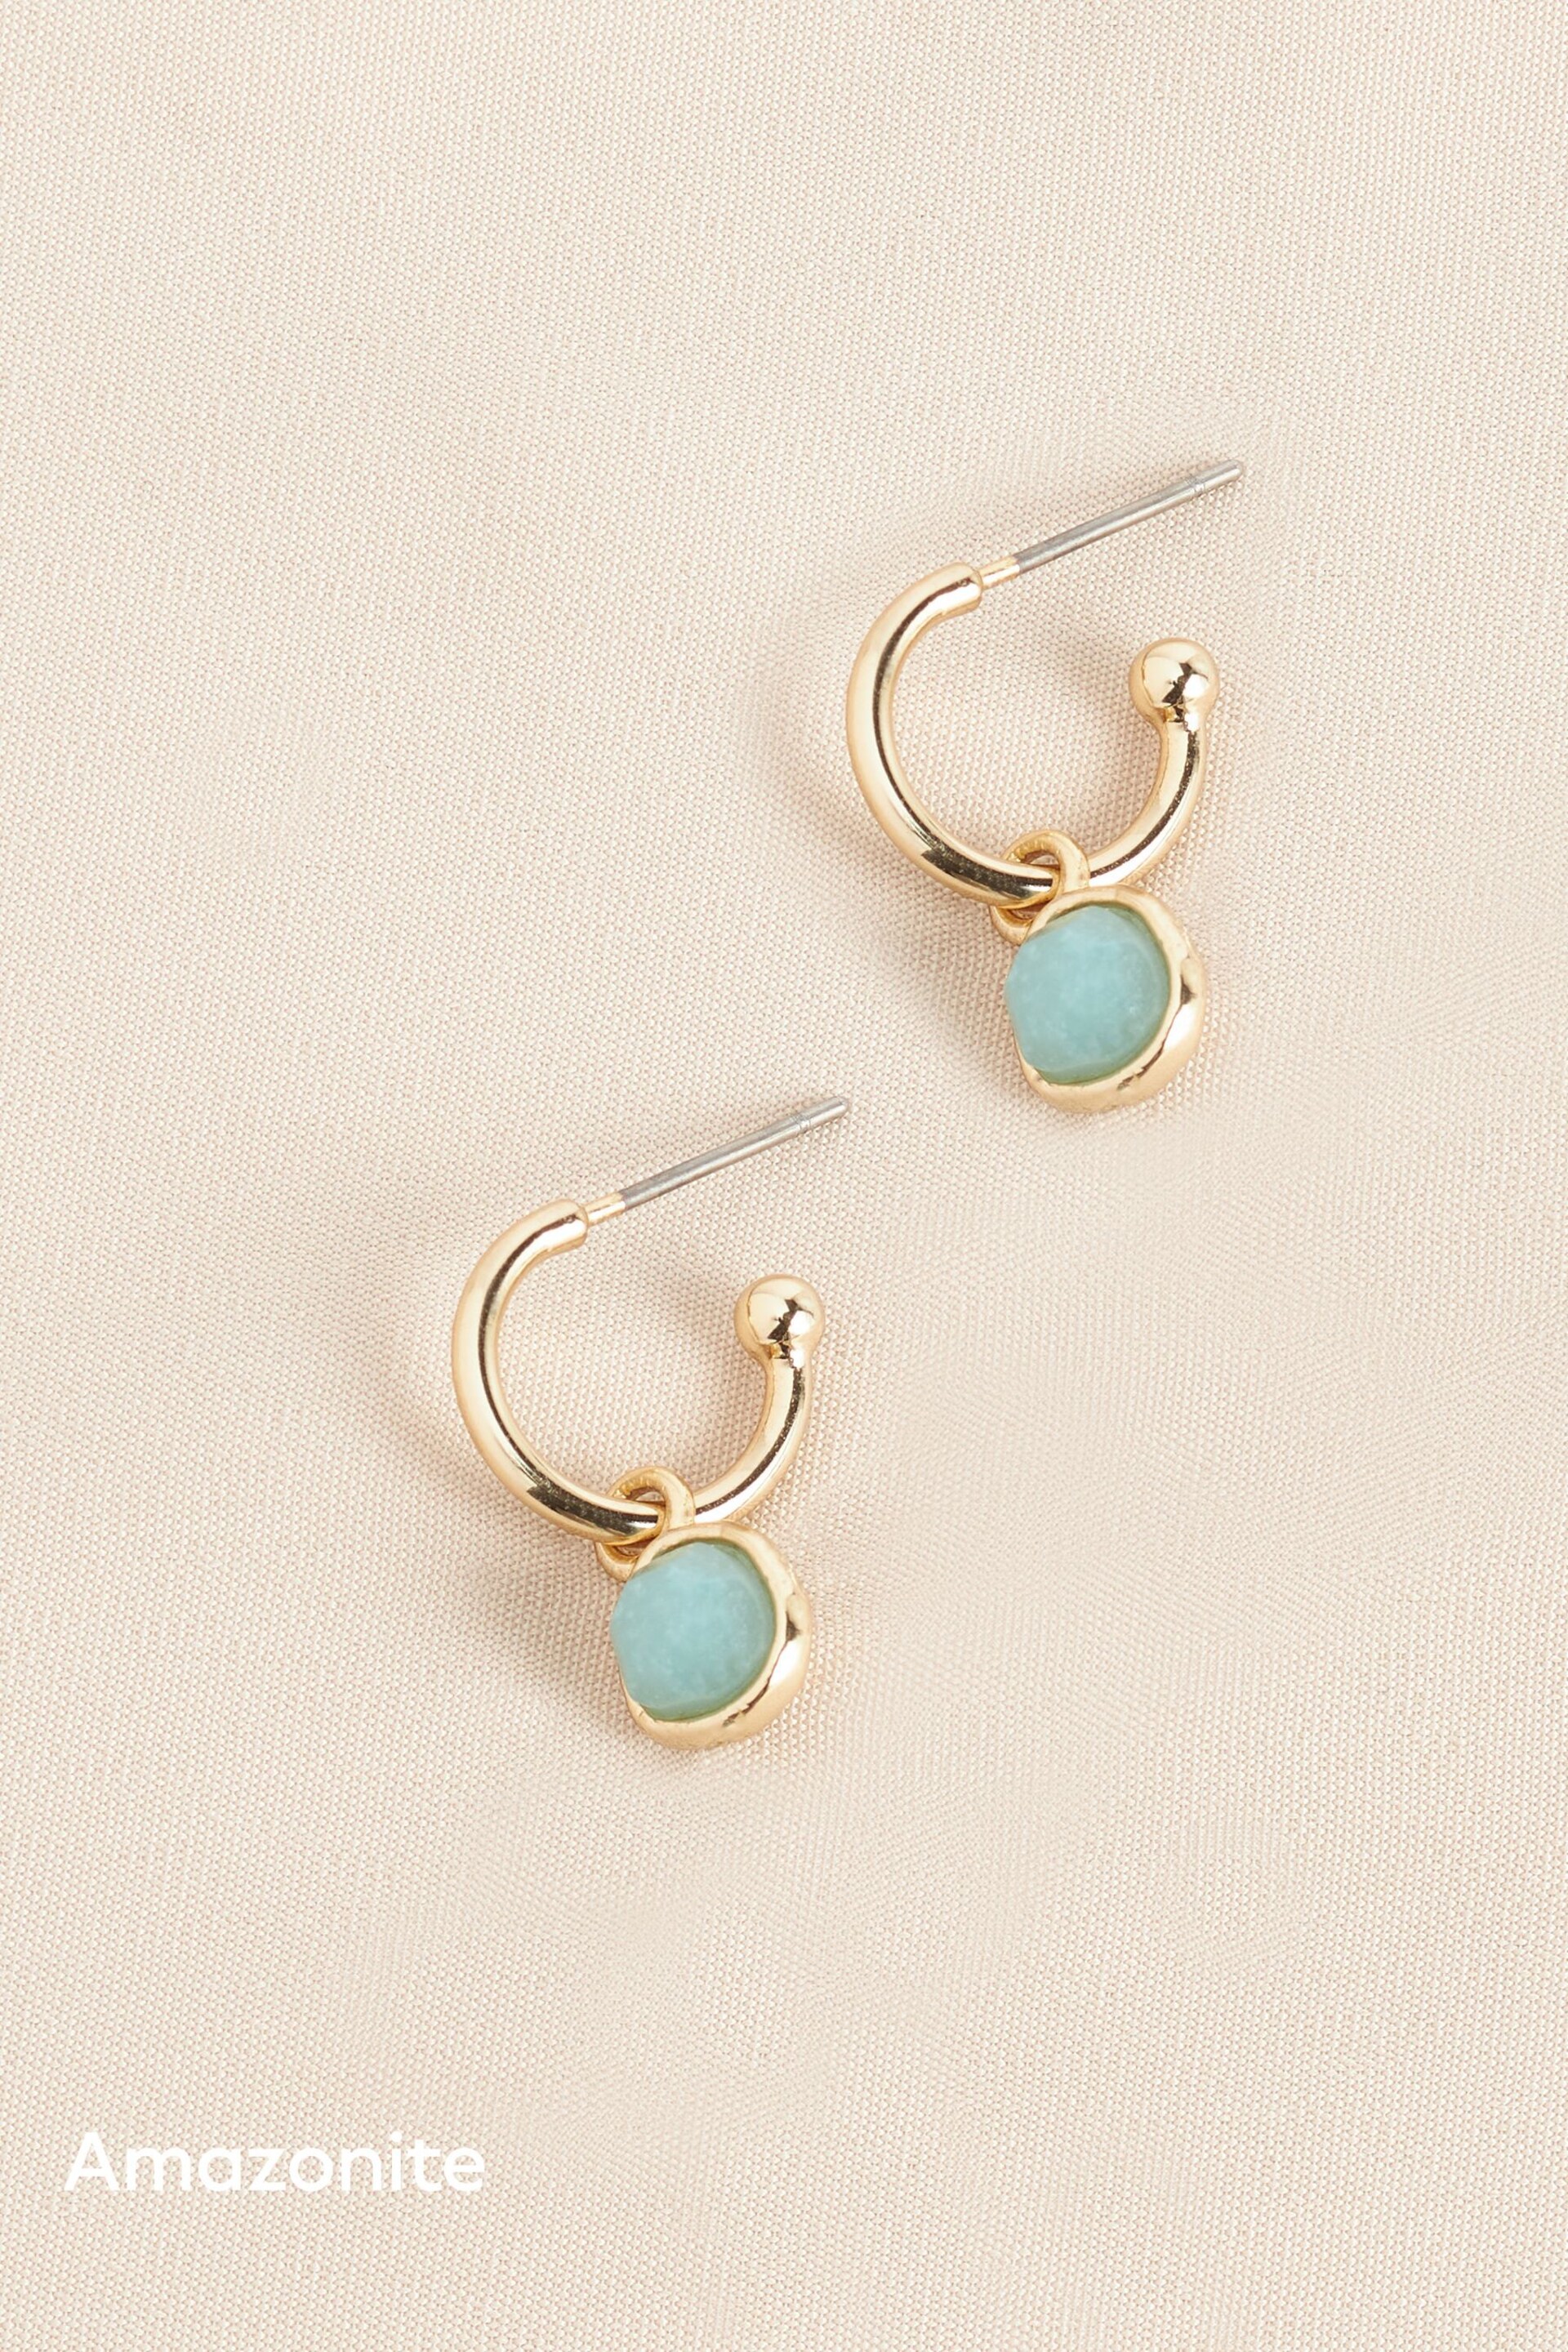 Gold/Silver Plated Sterling Silver Semi Precious Stone Hoop Earrings - Image 8 of 9